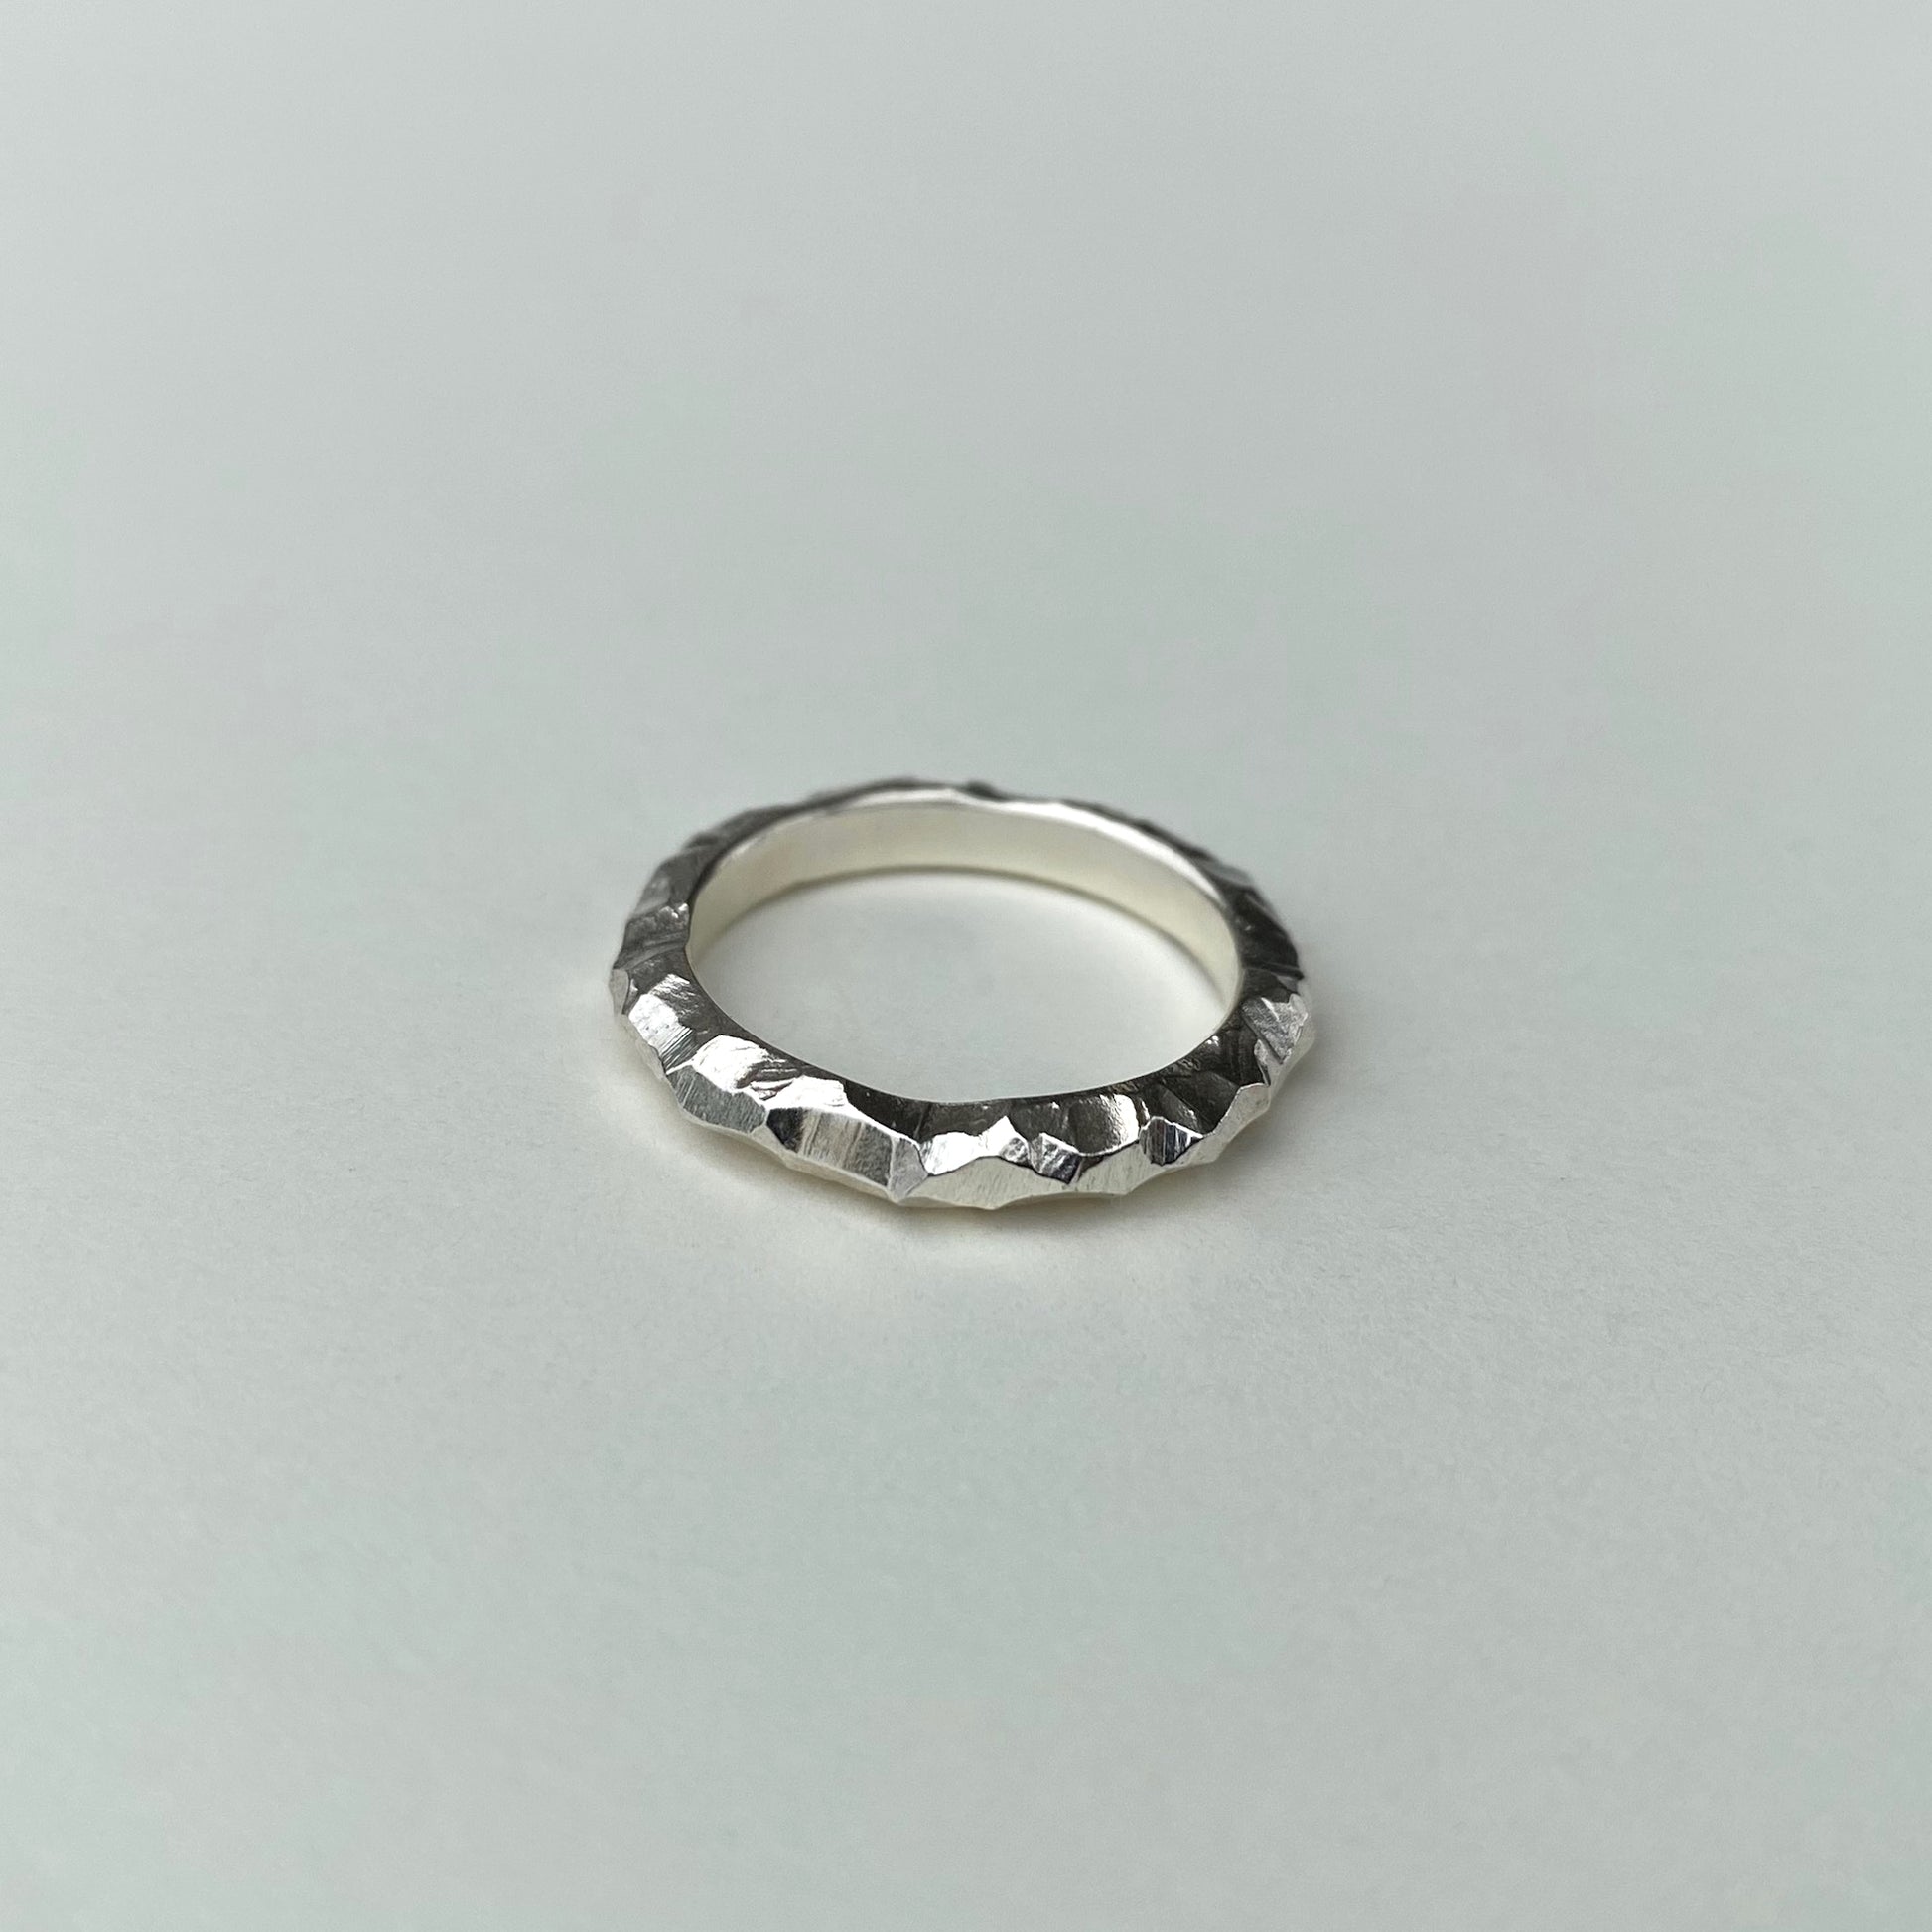 PERSEPHONE sterling silver Alliance ring